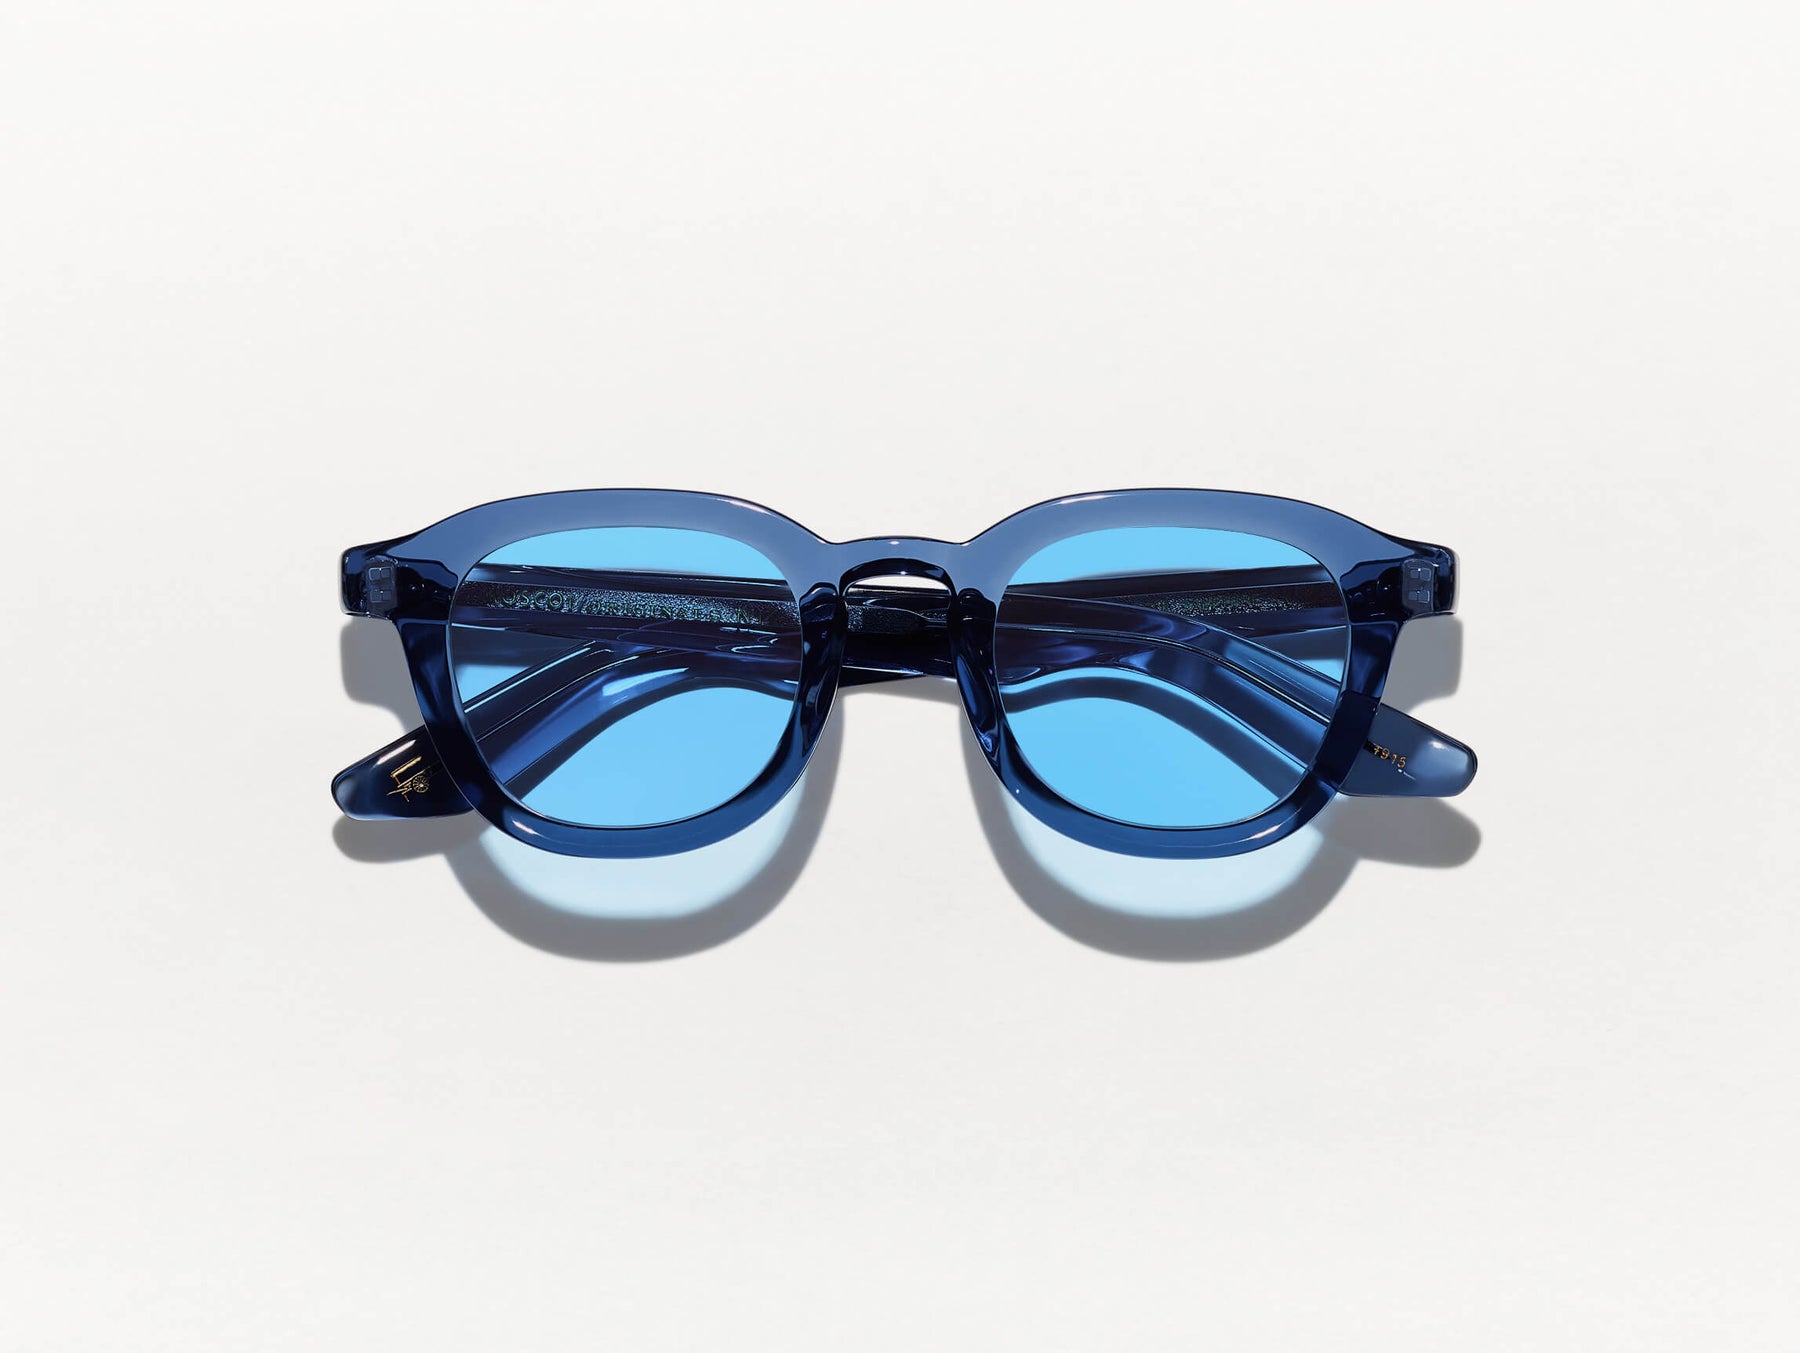 The DAHVEN SUN in Sapphire with Celebrity Blue Tinted Lenses